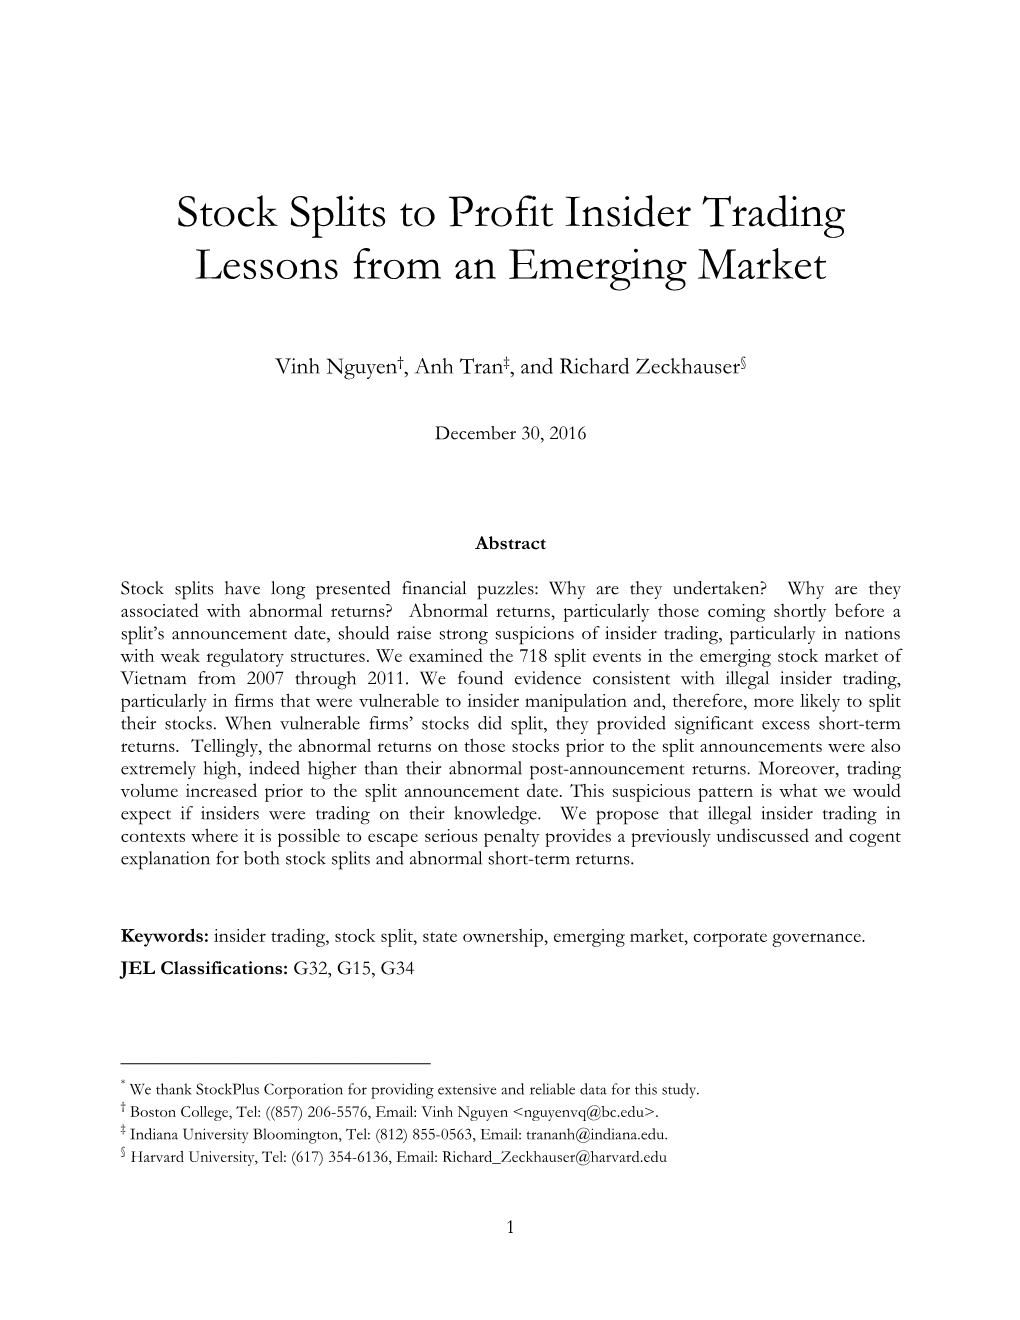 Stock Splits to Profit Insider Trading Lessons from an Emerging Market